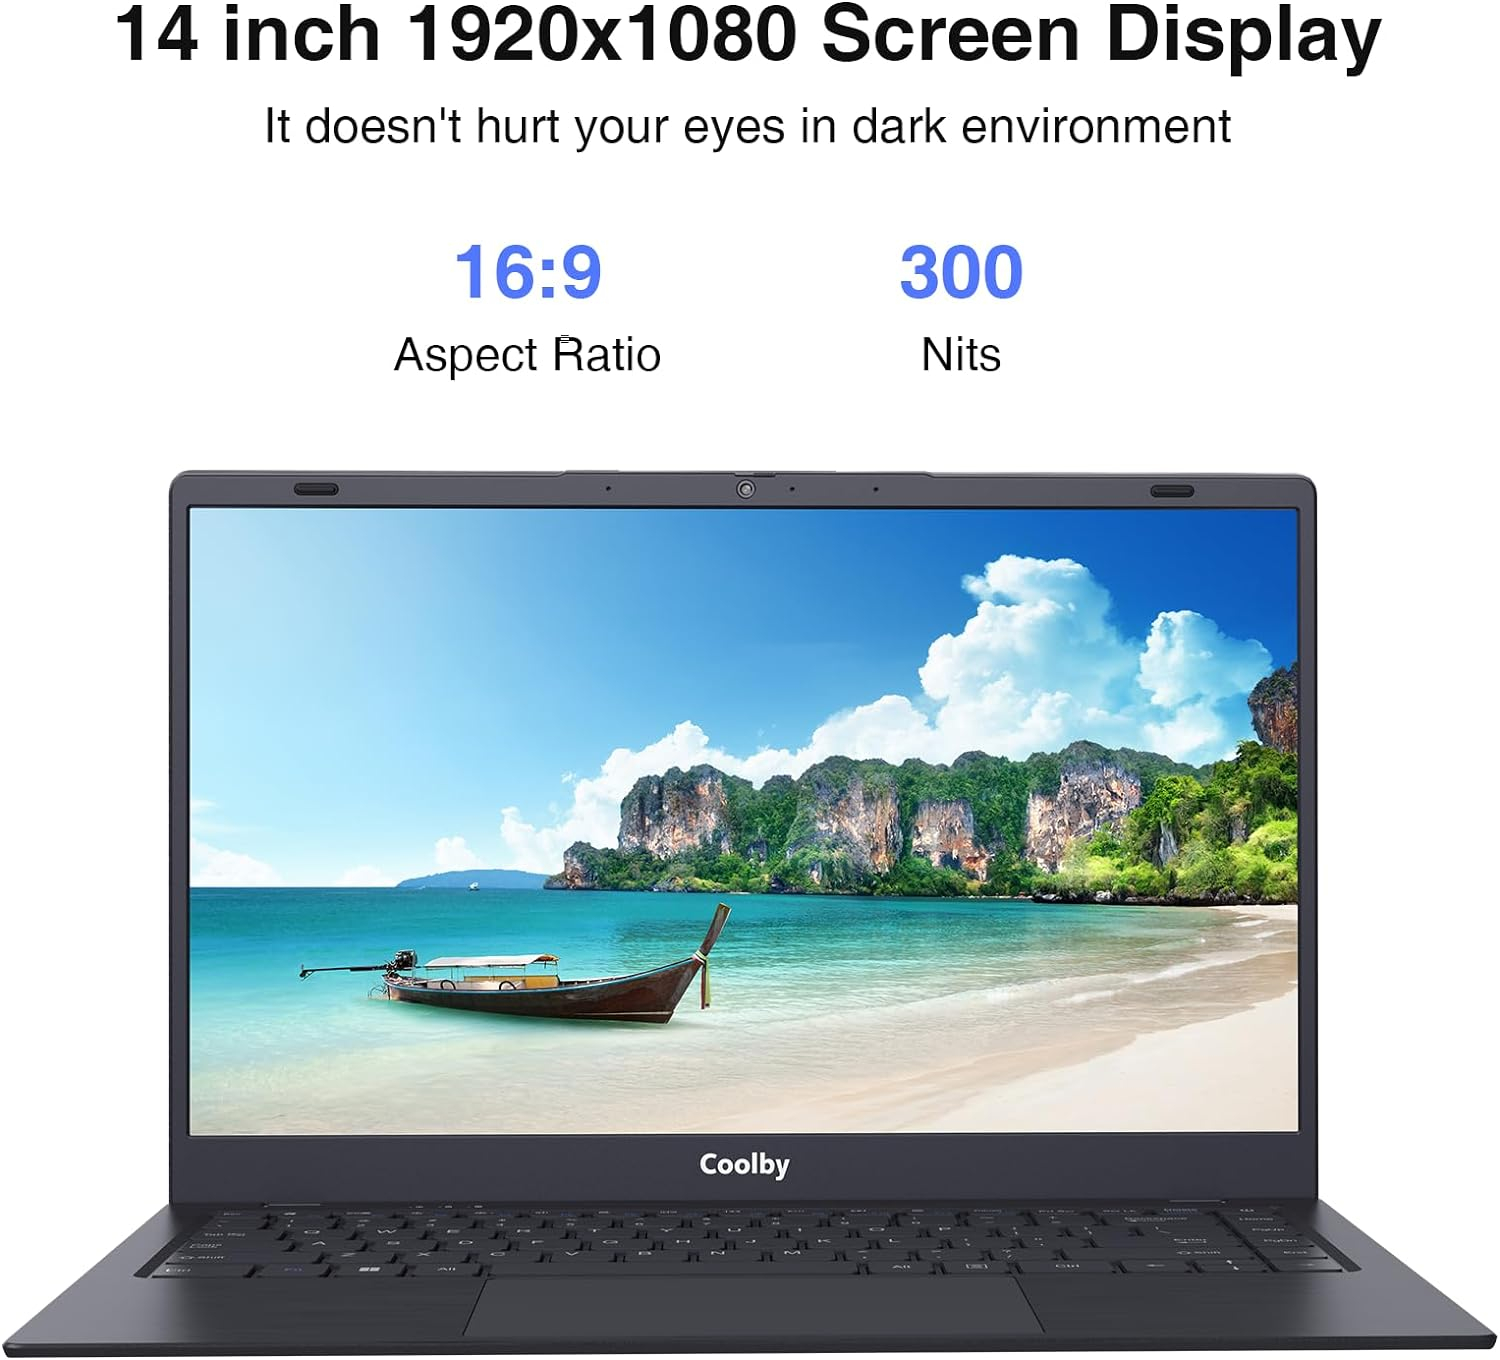 Coolby 2024 Windows 11 Laptop Computer, 14.1 inch Notebook PC with Intel J4005 Processor, 12GB DDR4 RAM / 512GB SSD, 1080P FHD Display, WiFi 5, BT, Ethernet Port for School, Business